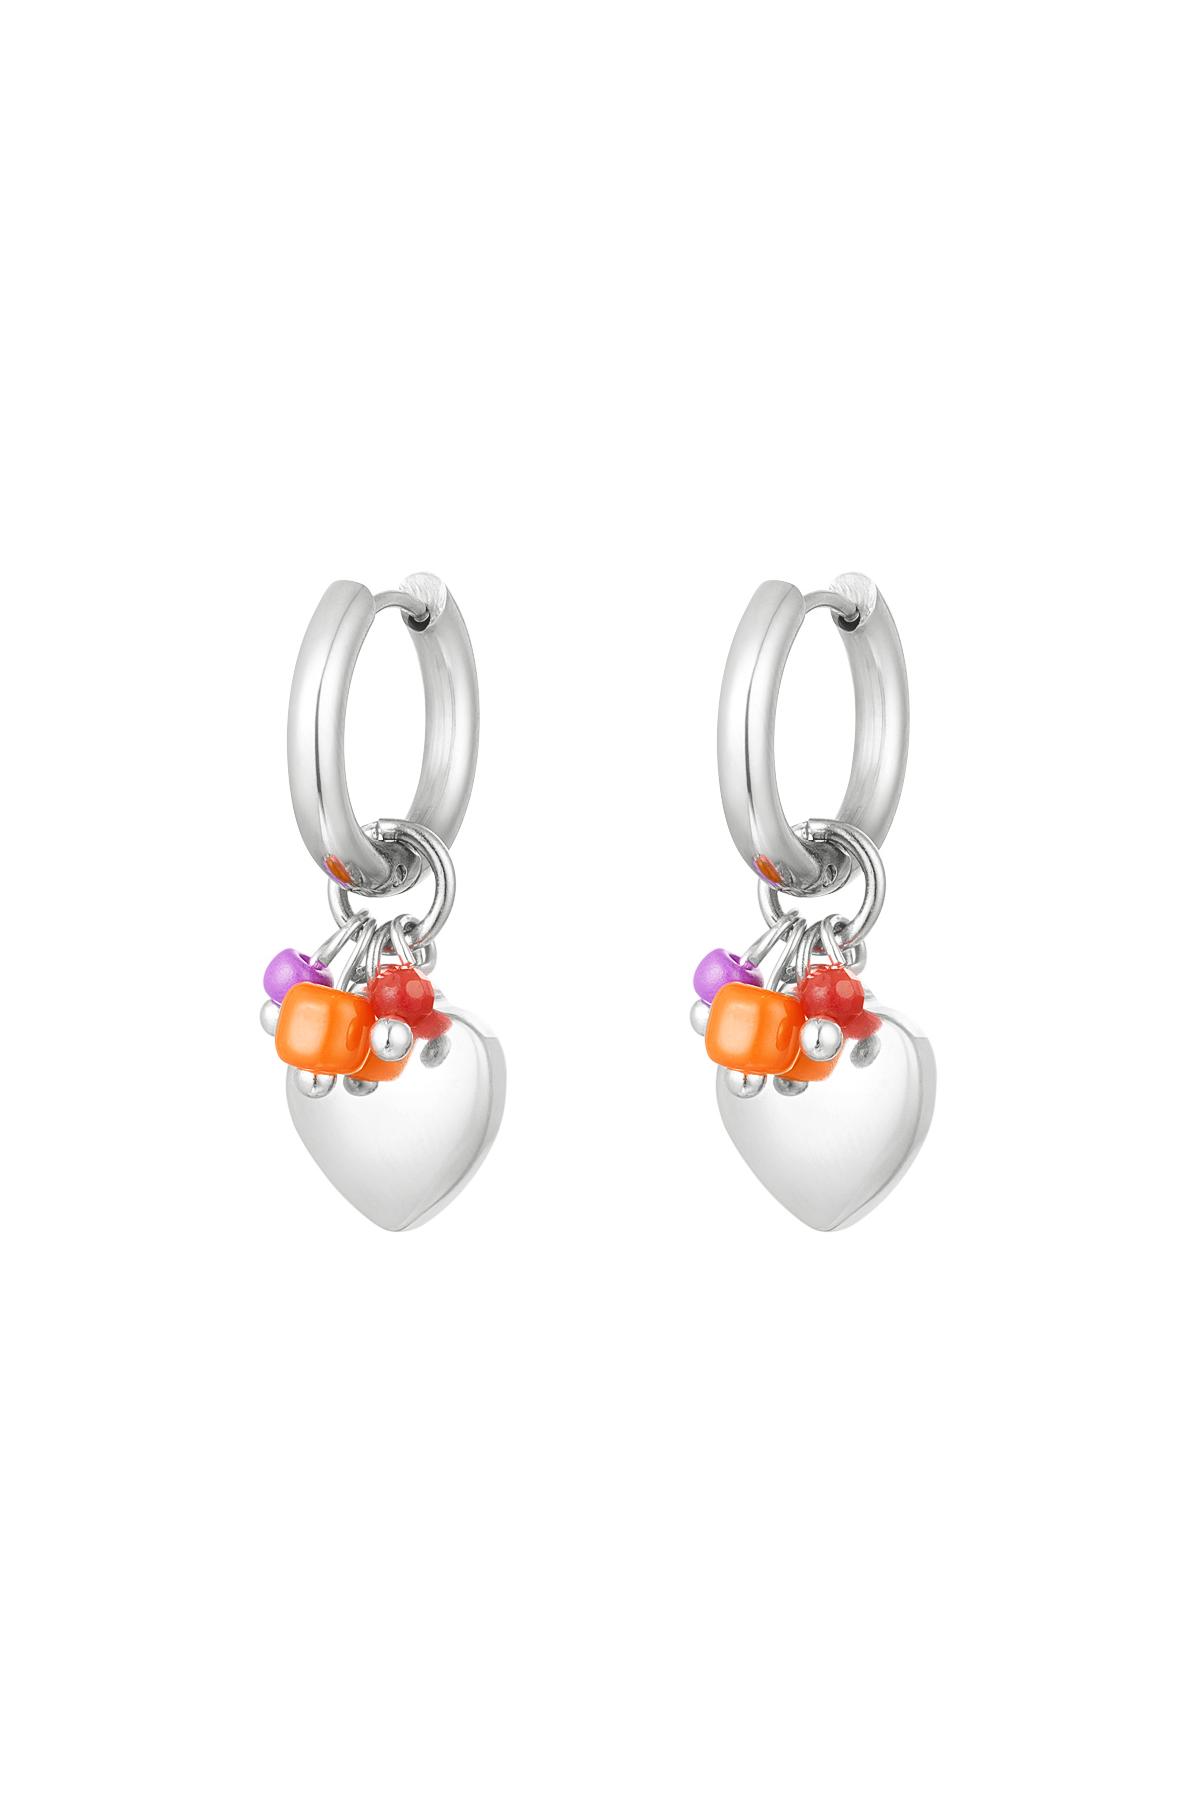 Earrings heart with beads Silver Stainless Steel h5 